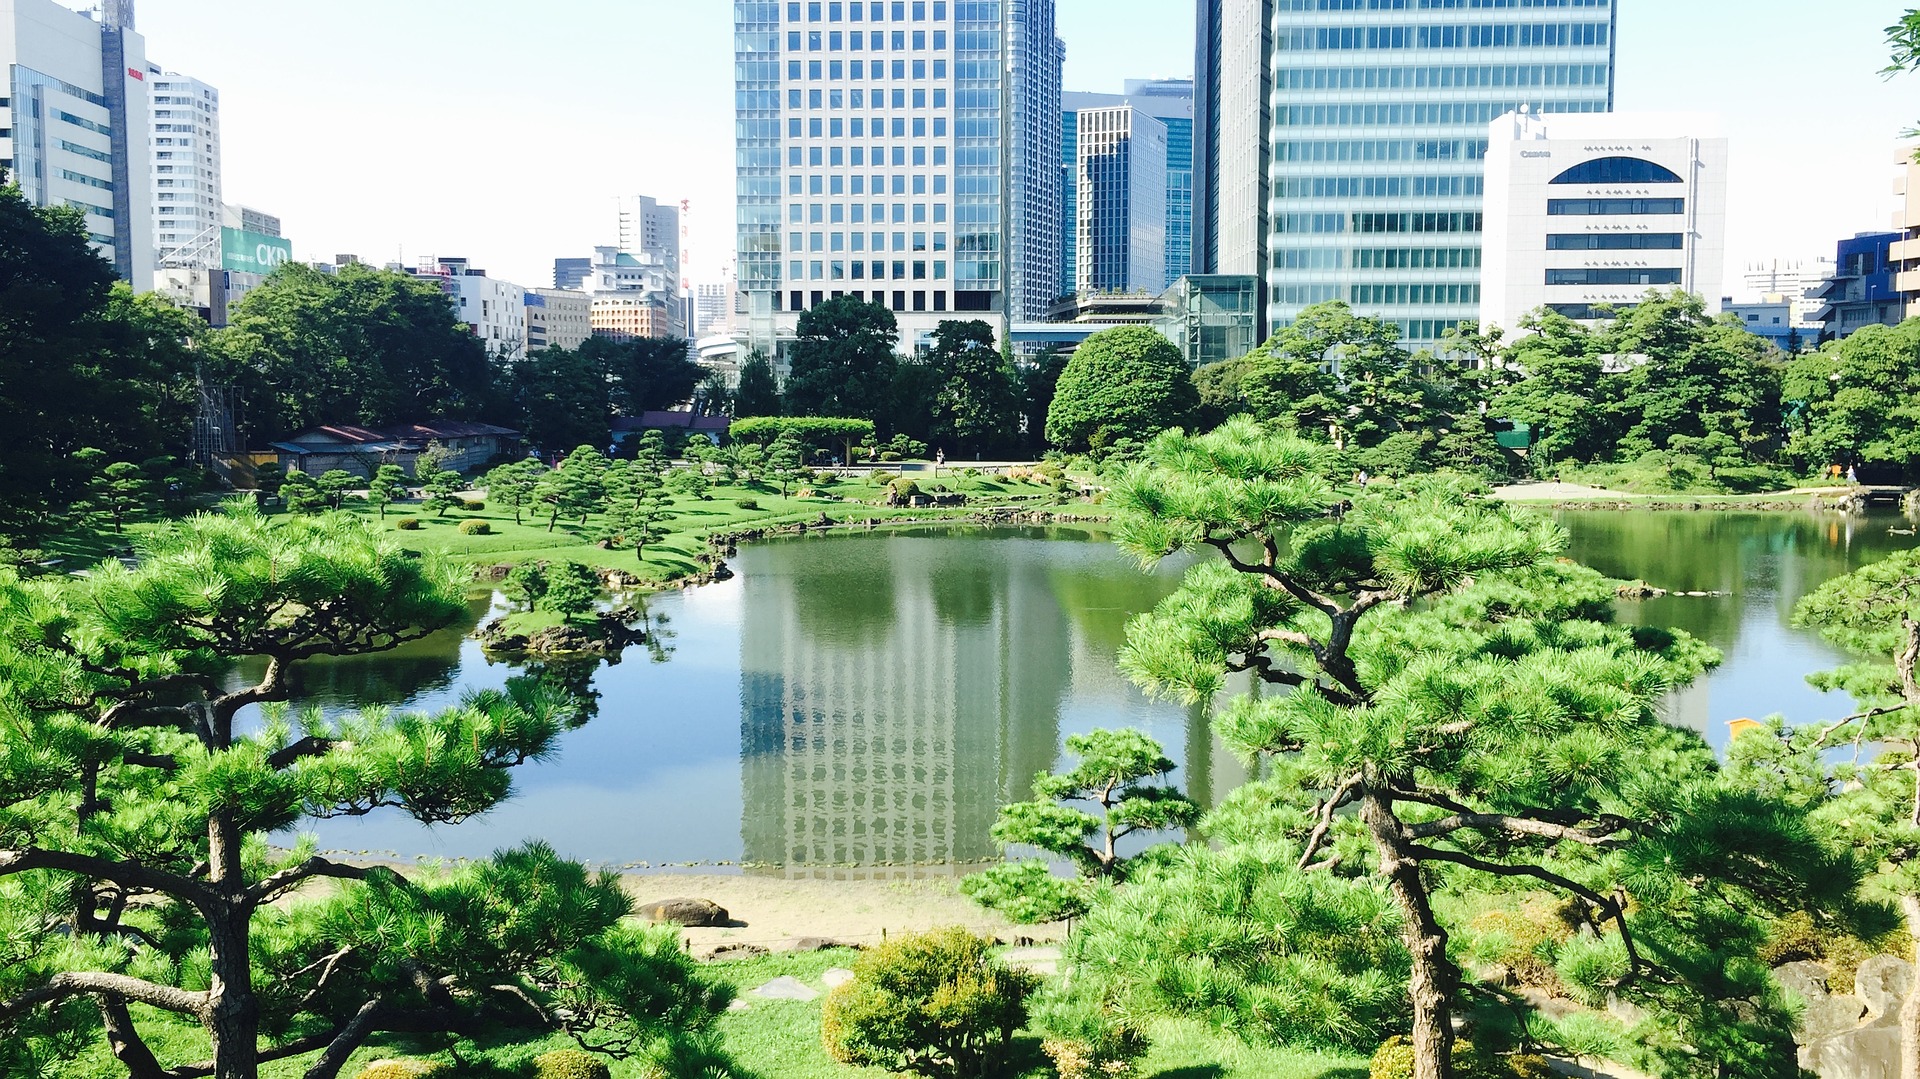 a photograph of a park garden in Tokyo, Japan. There is a large lake in the middle of the photograph, which is surrounded by trees. Buildings can be seen in the background.